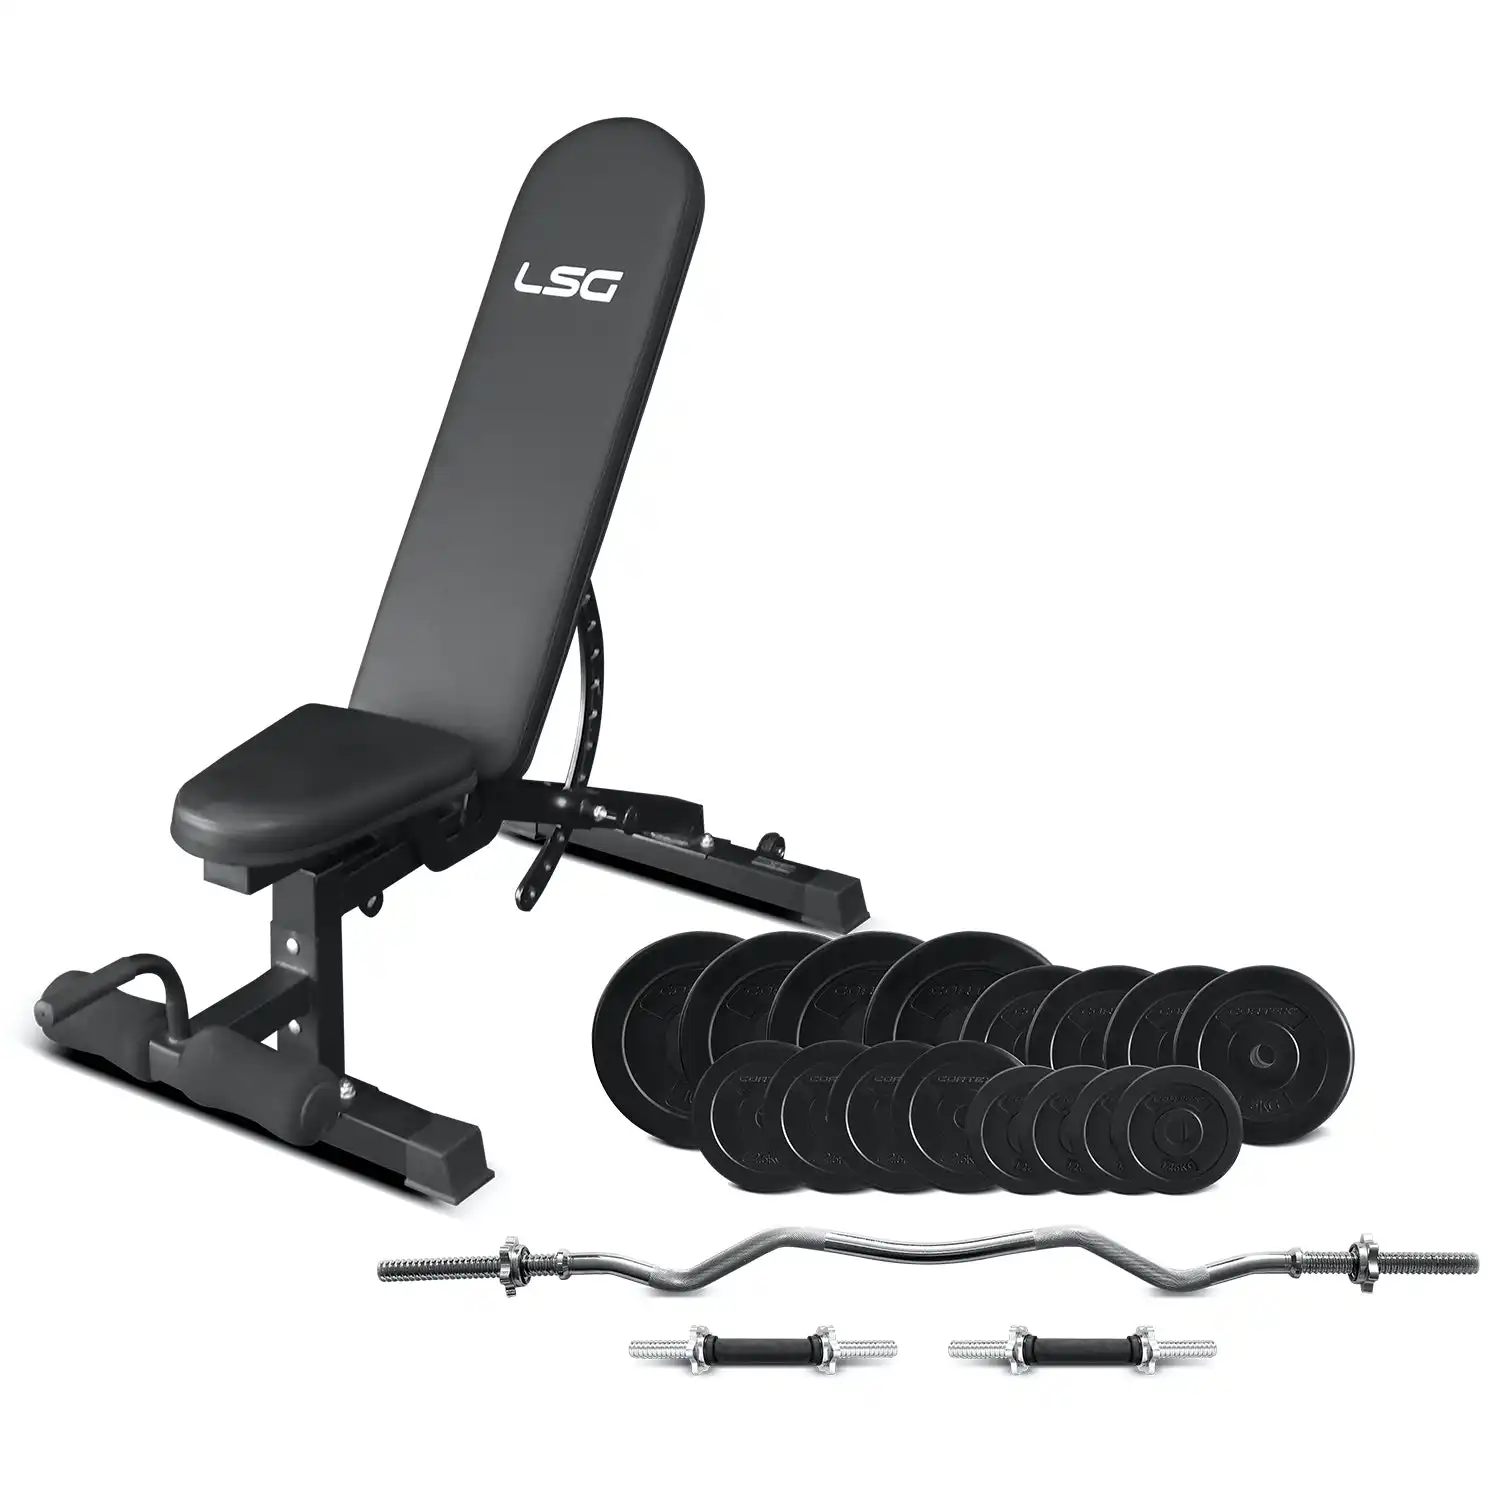 LSG GBN-006 14-Level FID Exercise Bench + Dumbbell & Curl Bar 84kg Weight Package